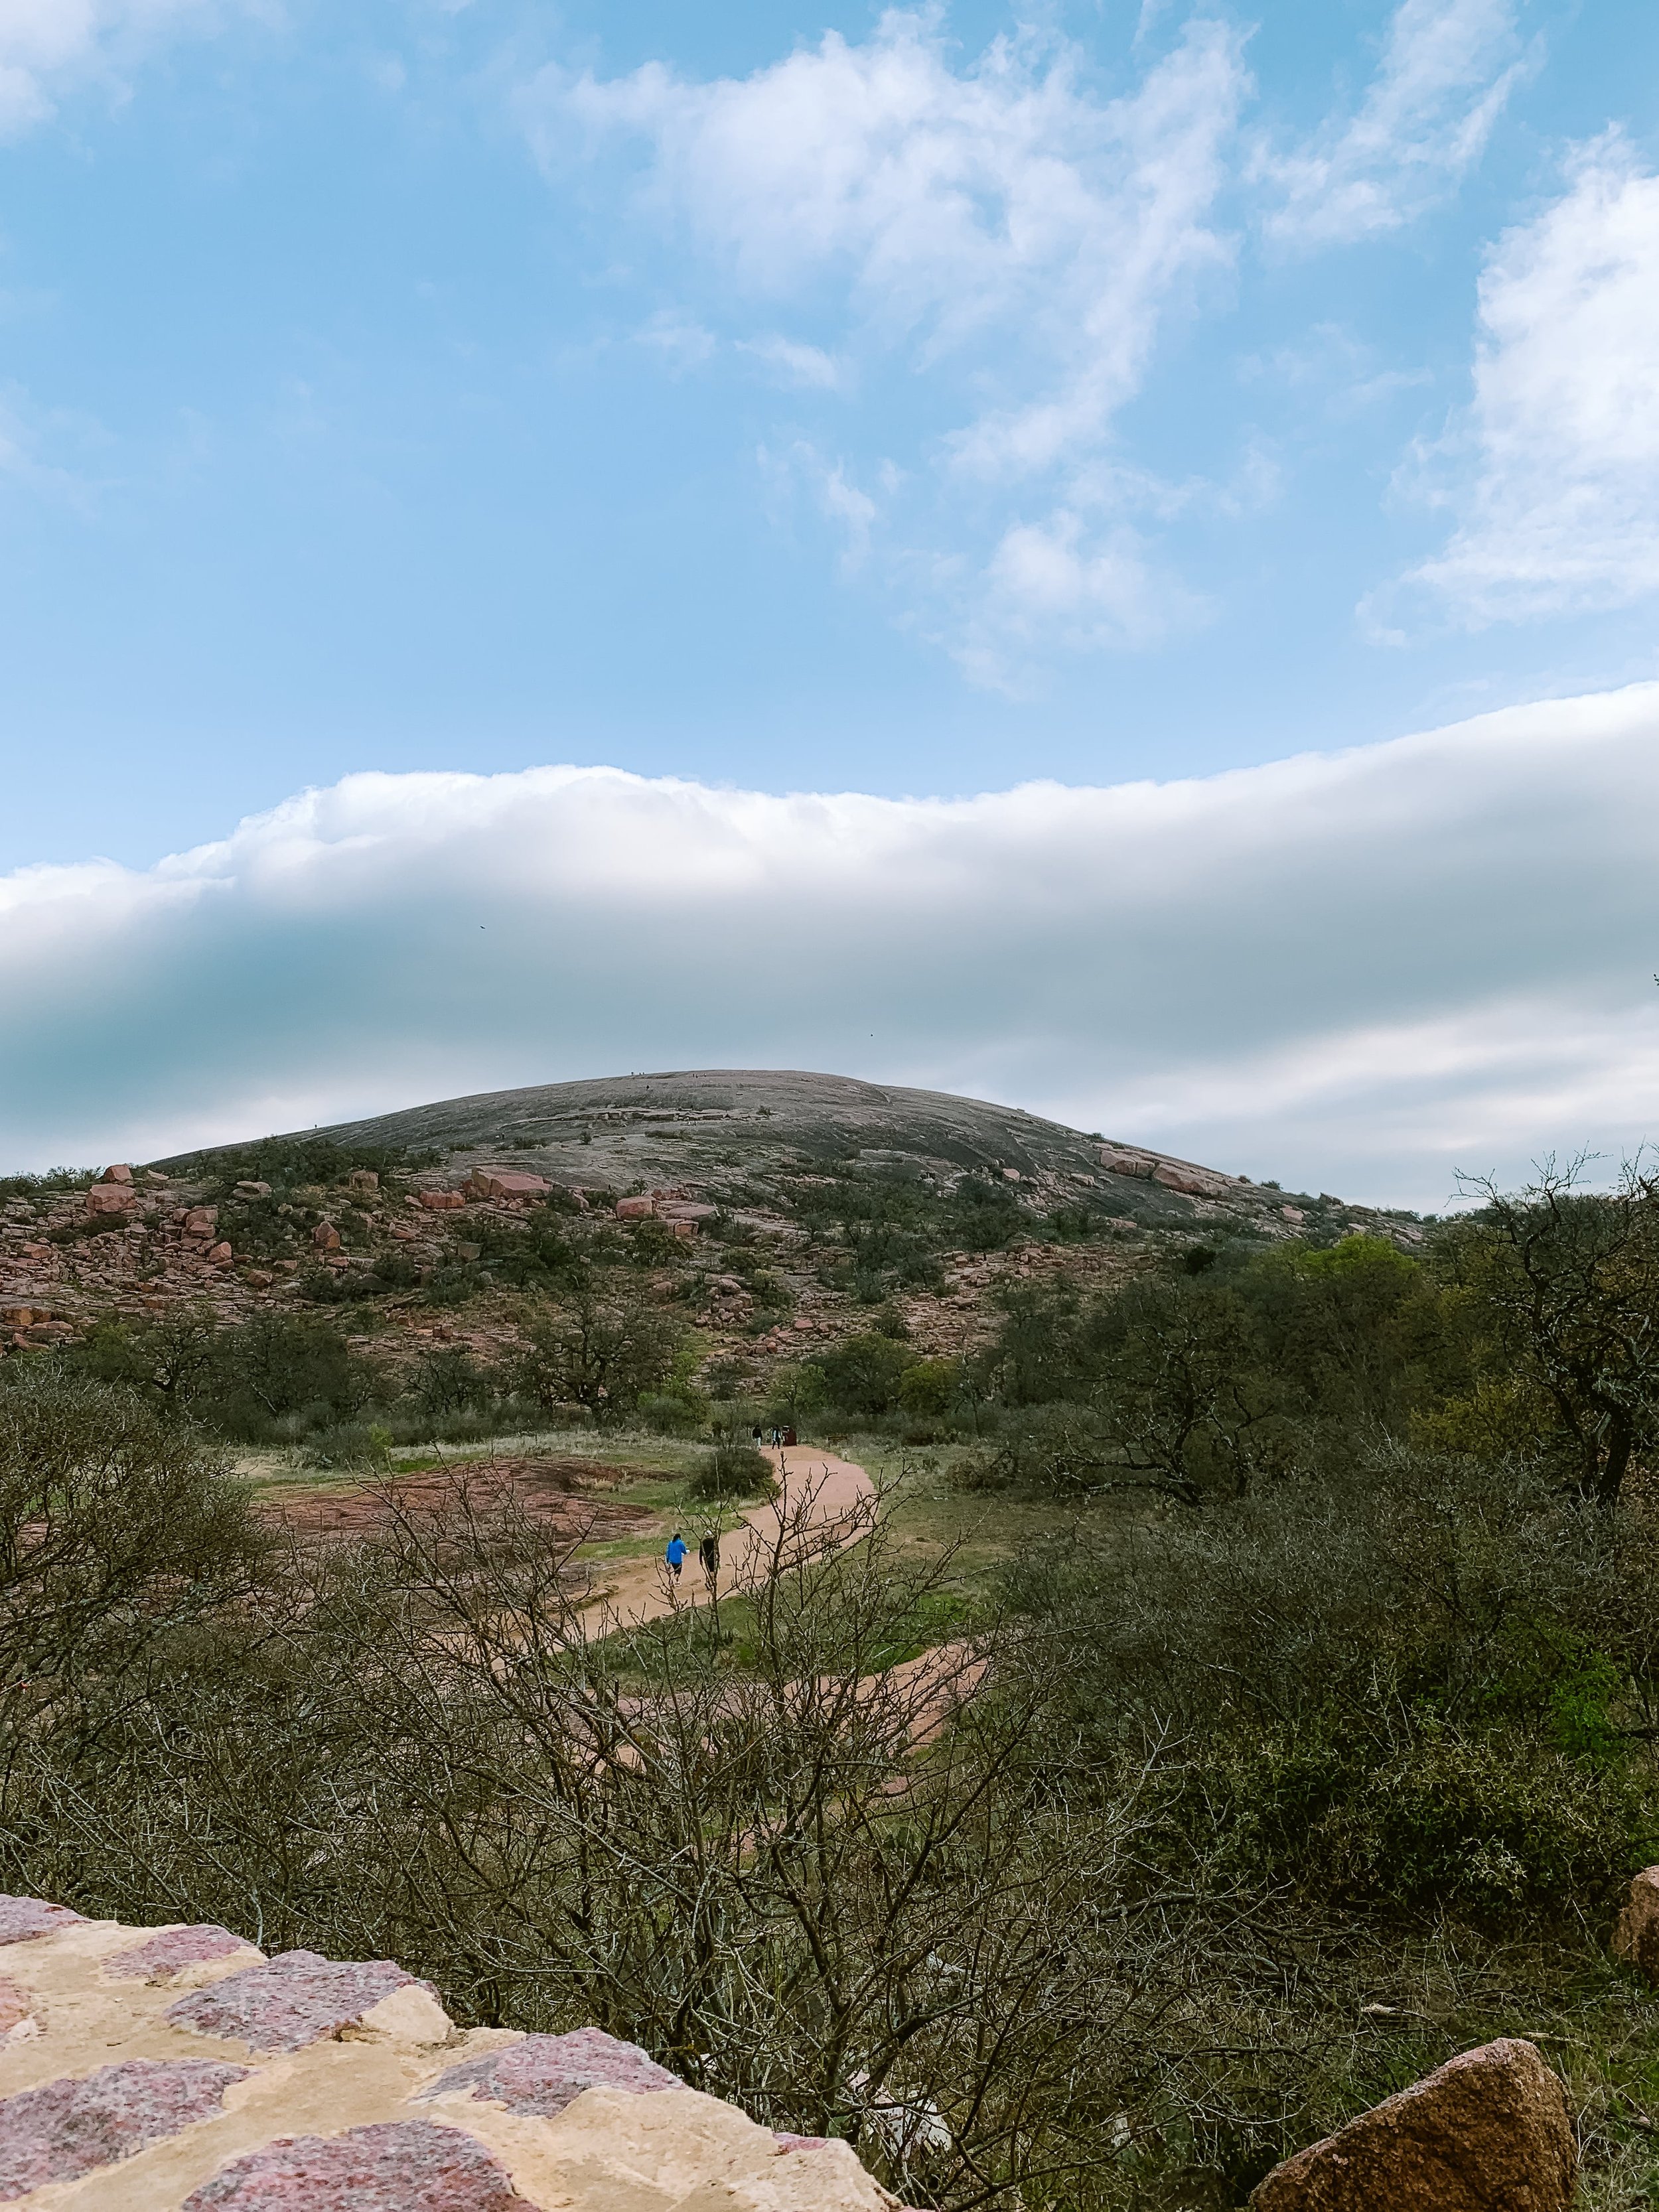 Planning your trip to Enchanted Rock_texas hiking adventure.jpg